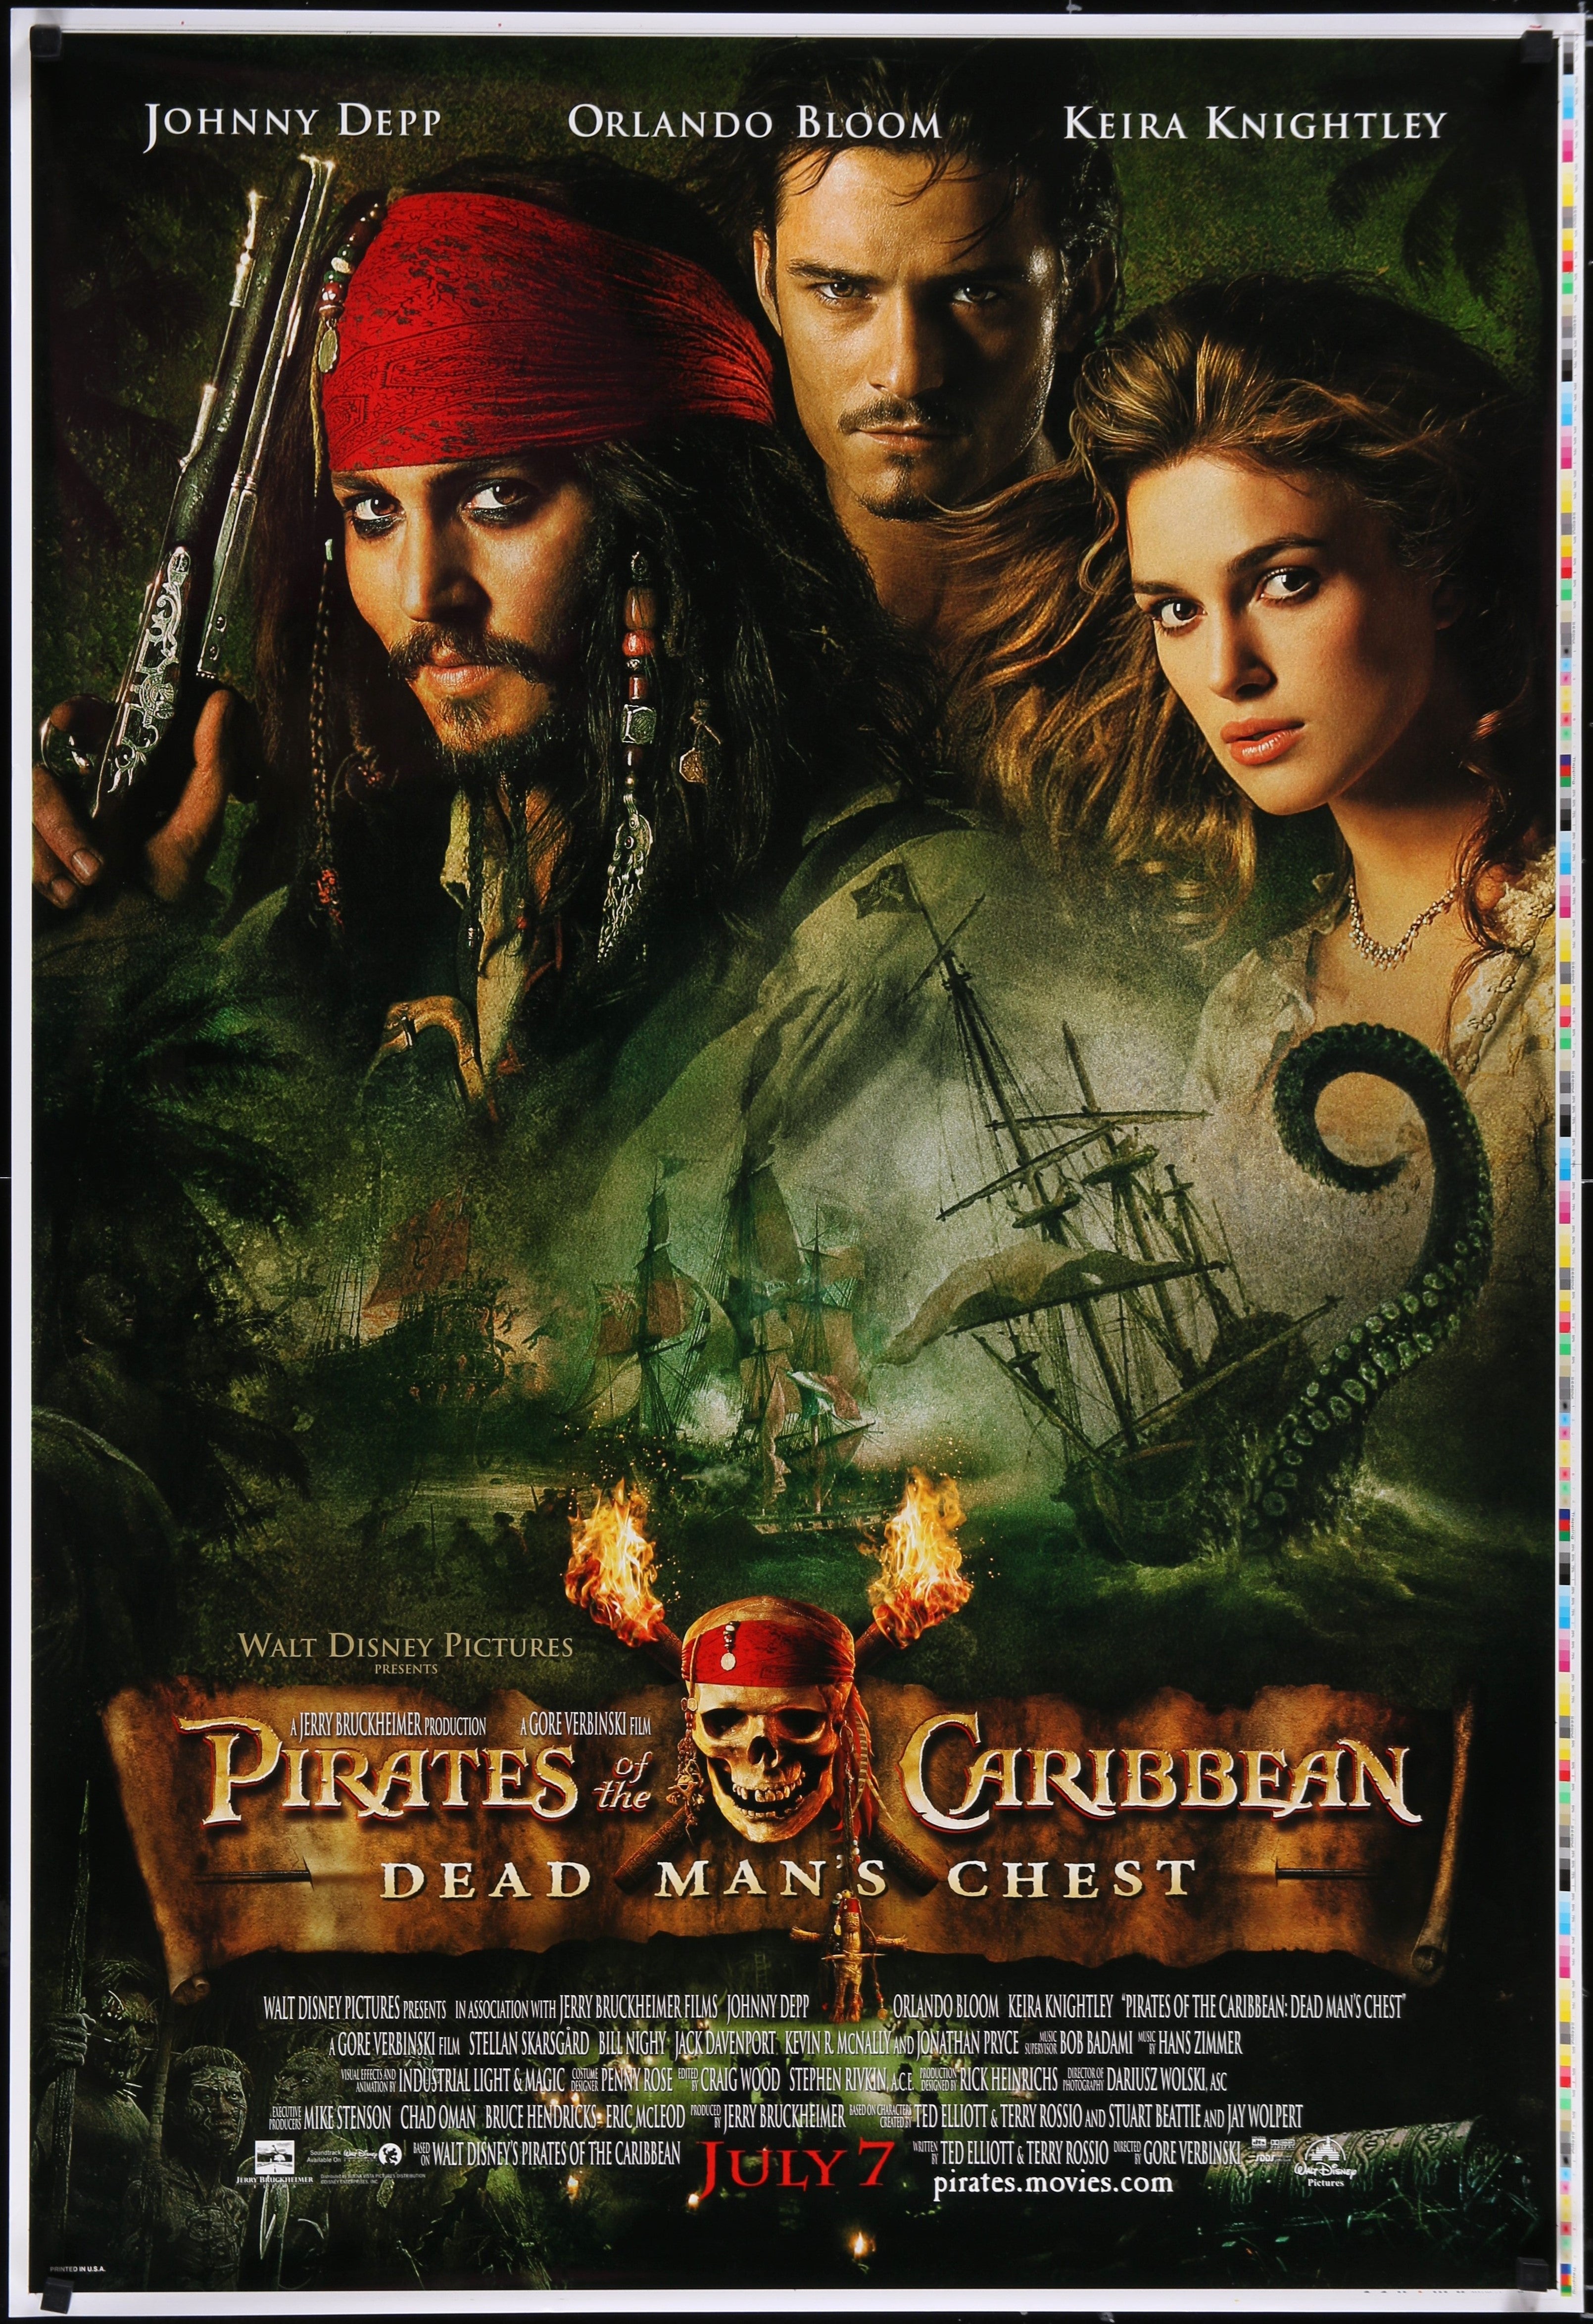 PIRATES OF THE CARIBBEAN: DEAD MAN'S CHEST (2006)